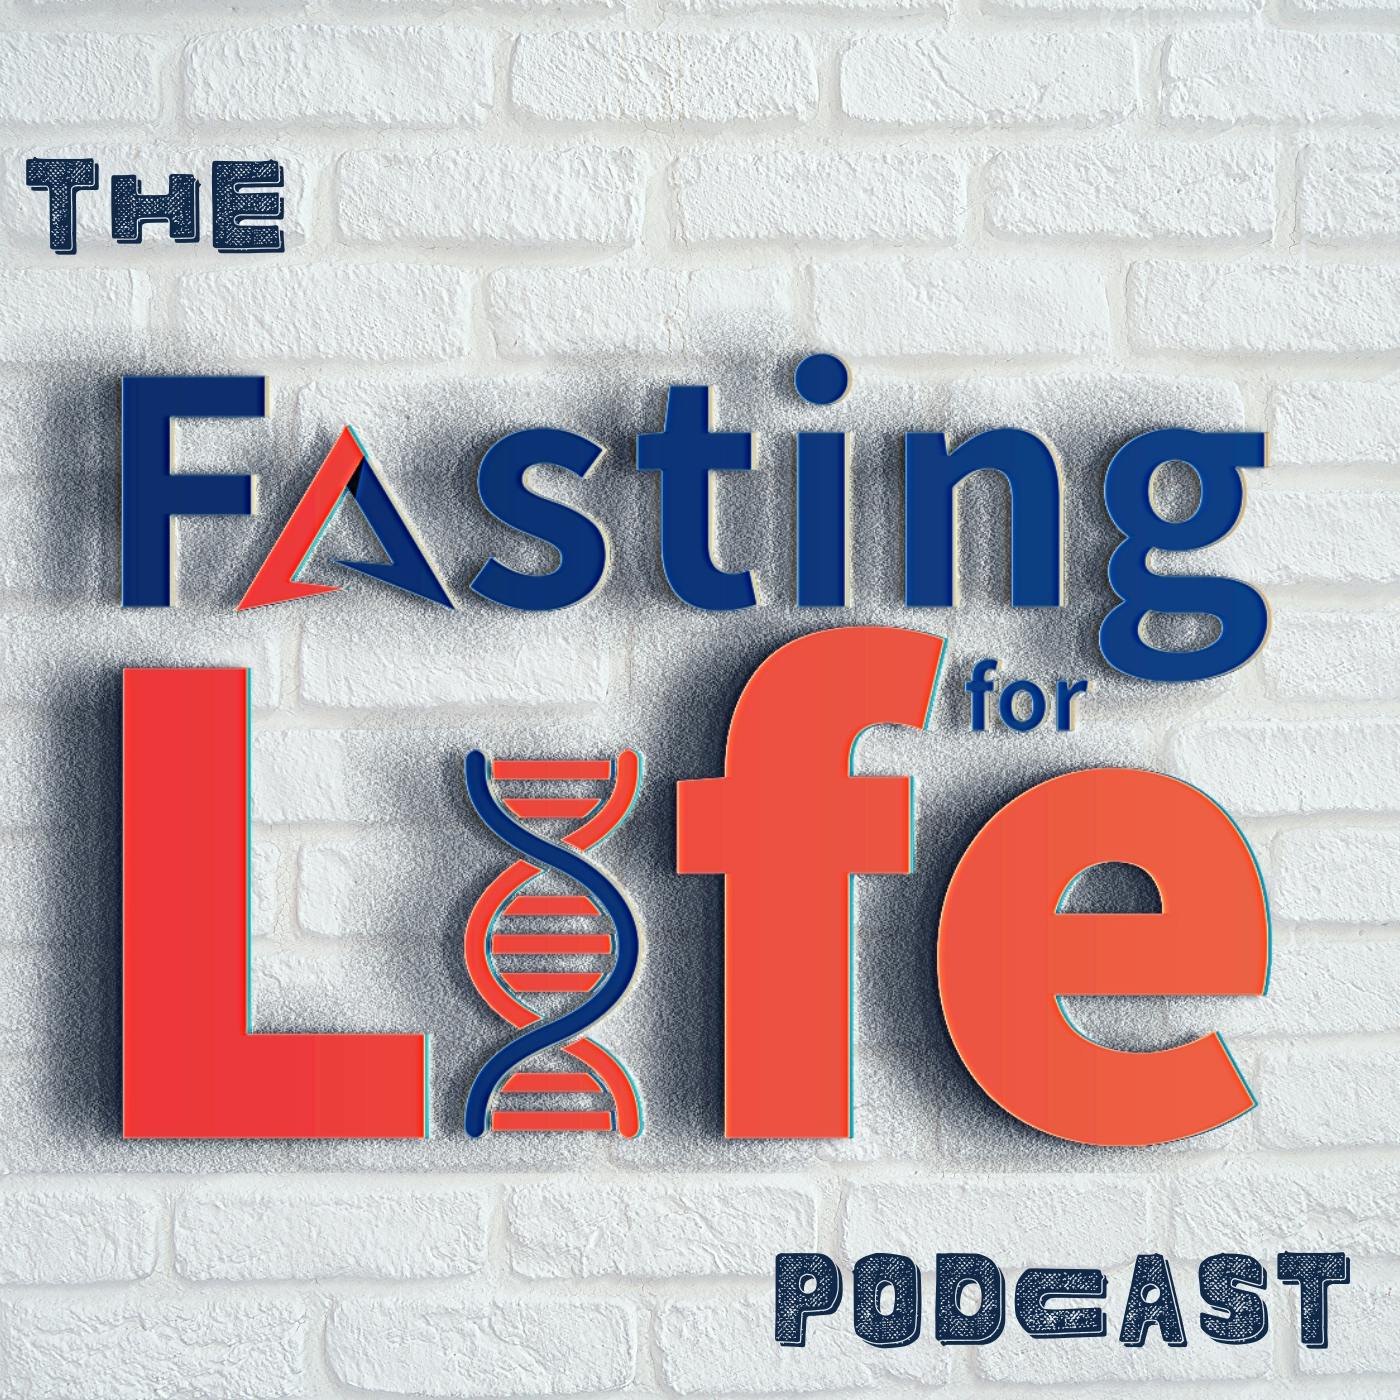 Ep. 98 - Fasting and the Holidays | How to lose 5 lbs in the next 10 days | Minimizing weight regain post fasting | Burning fat long after the FAST | 5 Ways to Reduce Weight Gain After FASTING | Free 